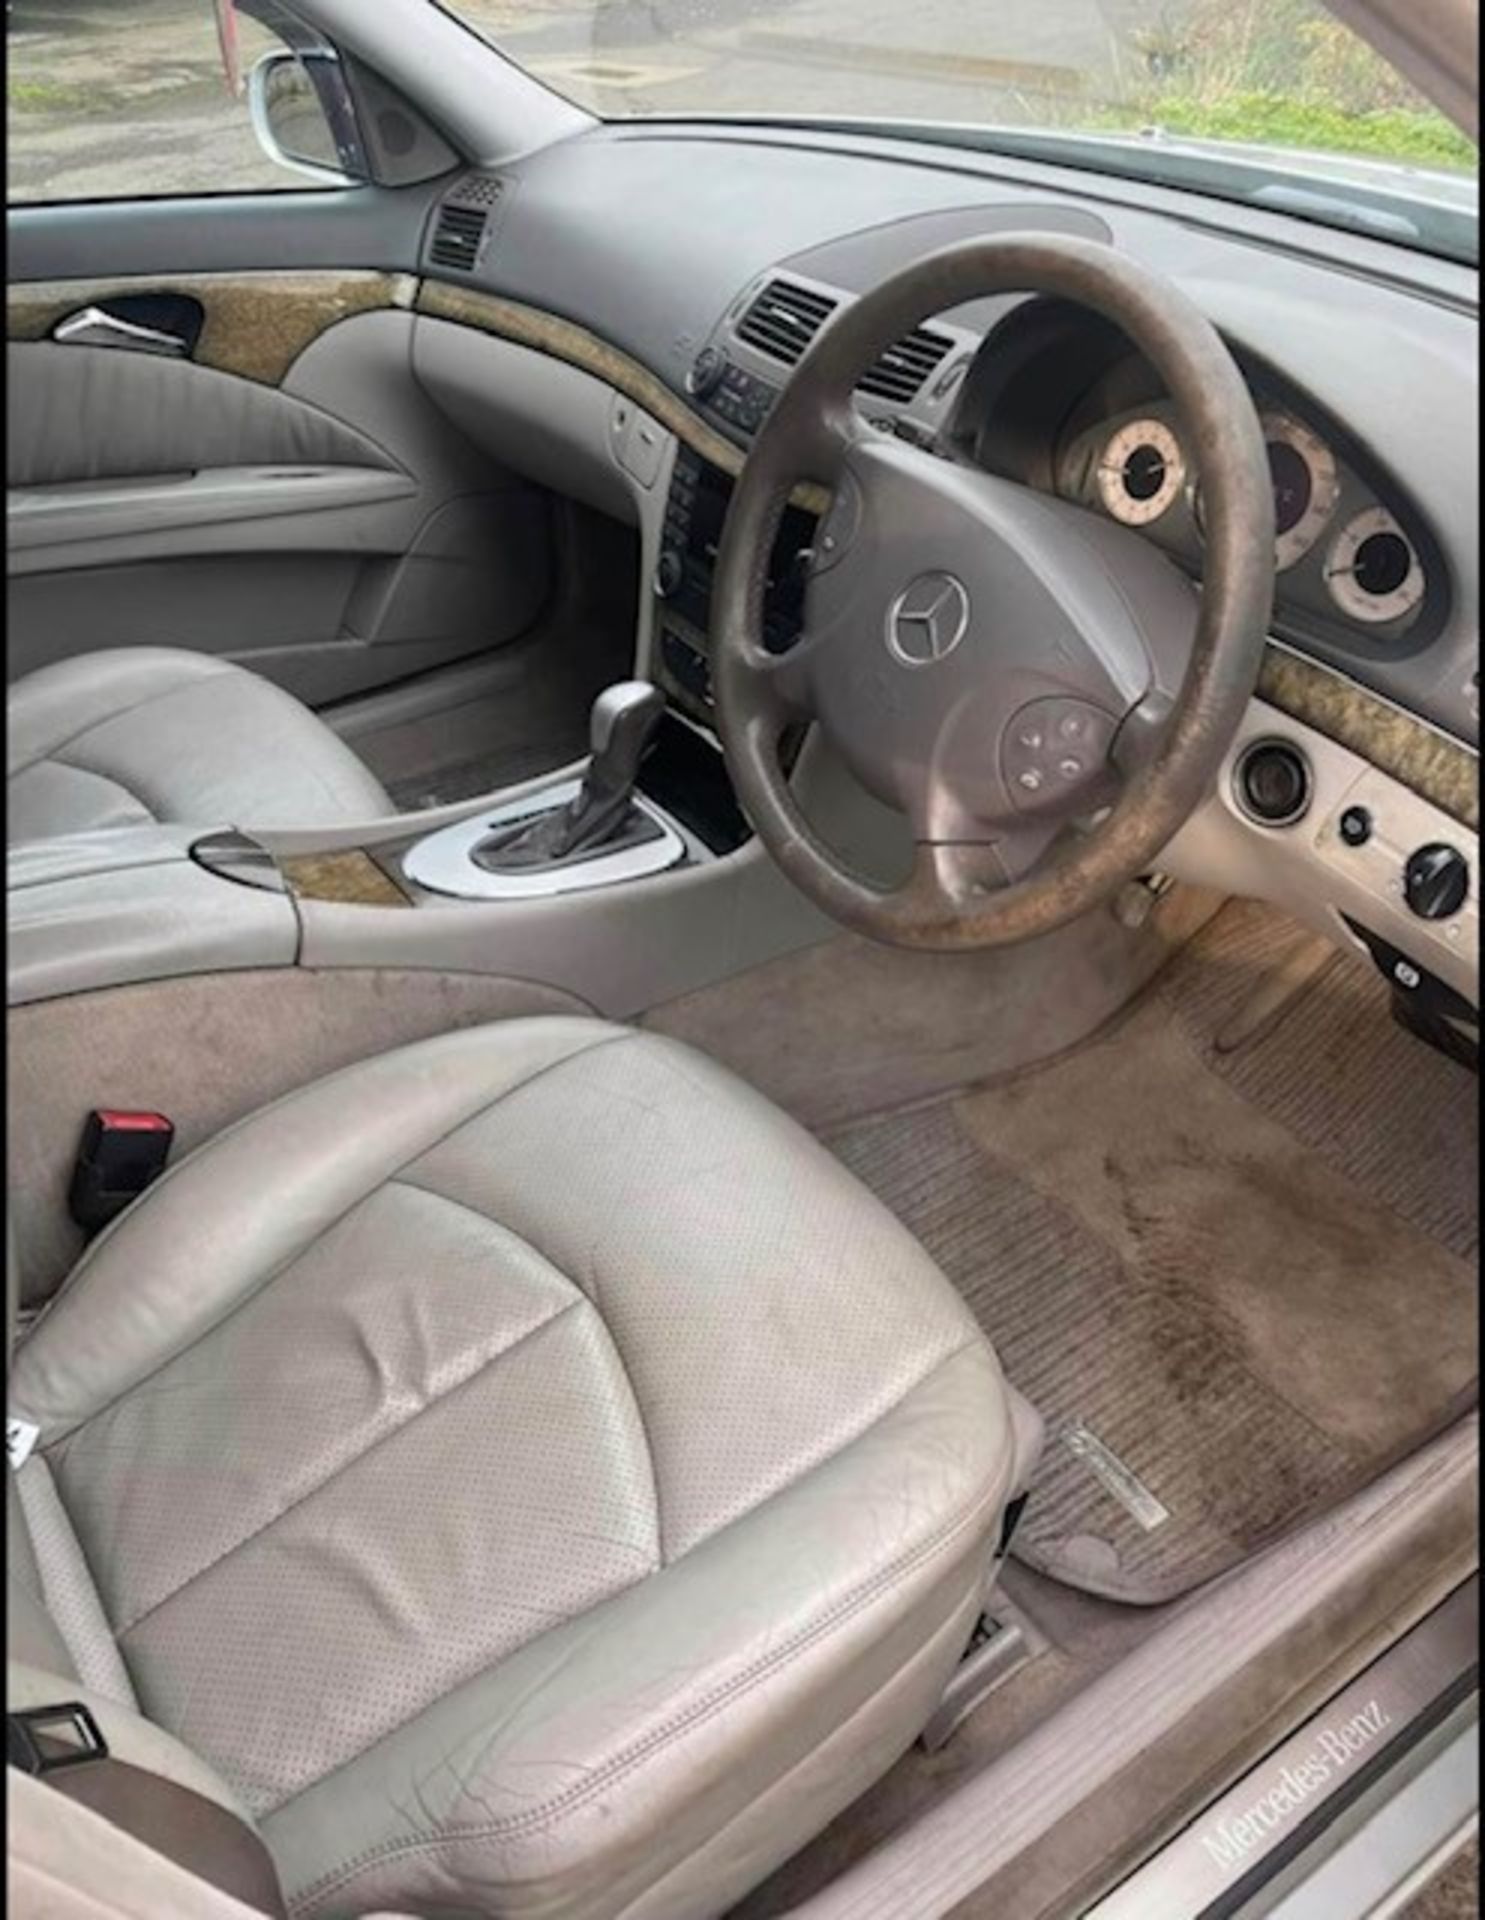 Mercedes E320 CDI 103k genuine miles ,as per pictures has scratches as shown in photos but is all in - Image 14 of 14